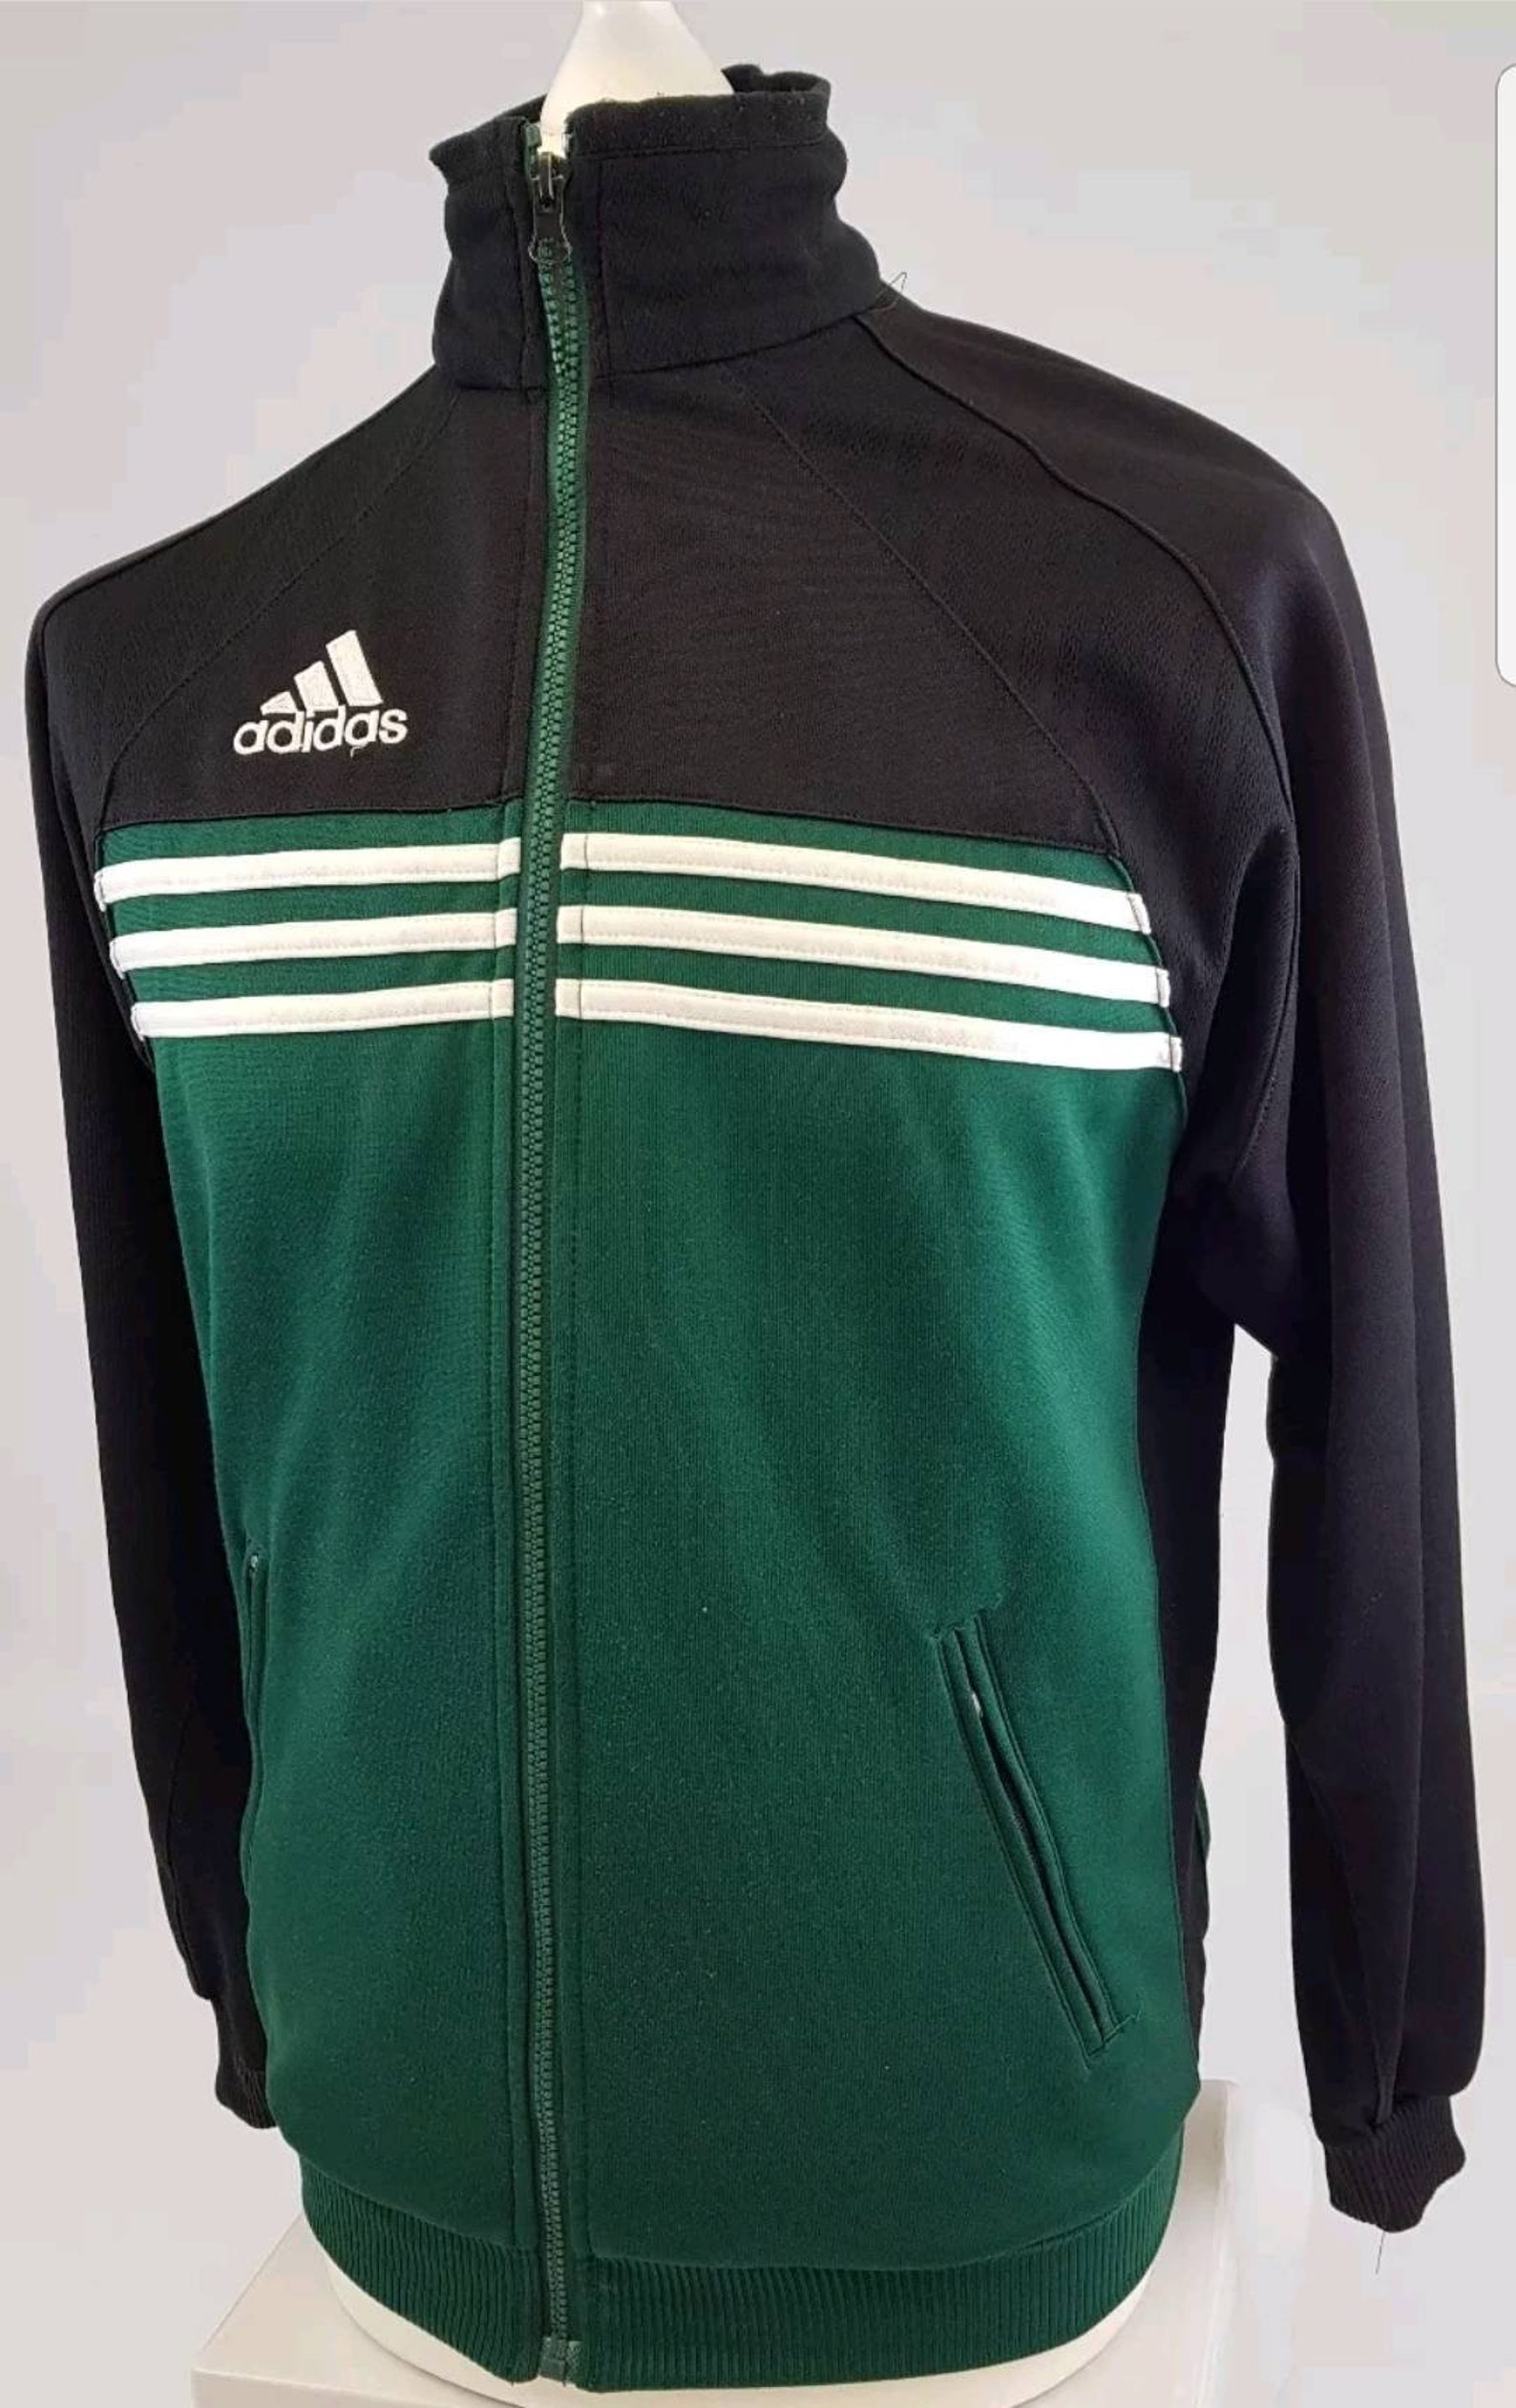 Adidas Vintage 90s Running Track Sports Top Size Small / | Etsy